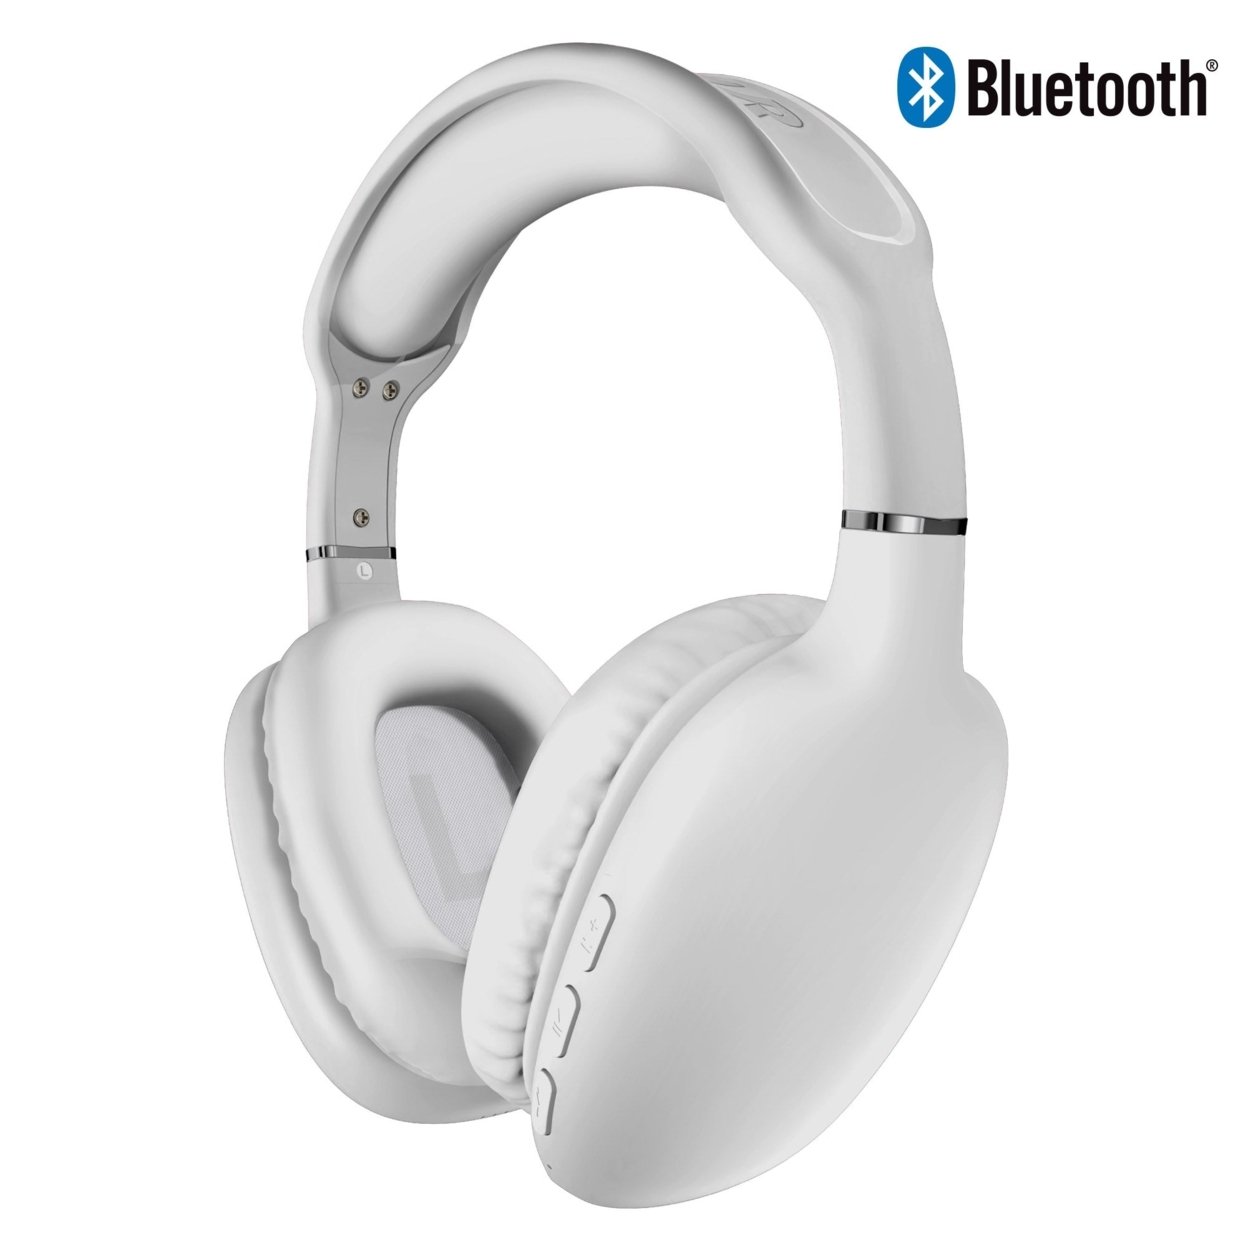 HyperGear VIBE Wireless Bluetooth Headphones W Extended Battery Life (VIBE-PRNT) - White